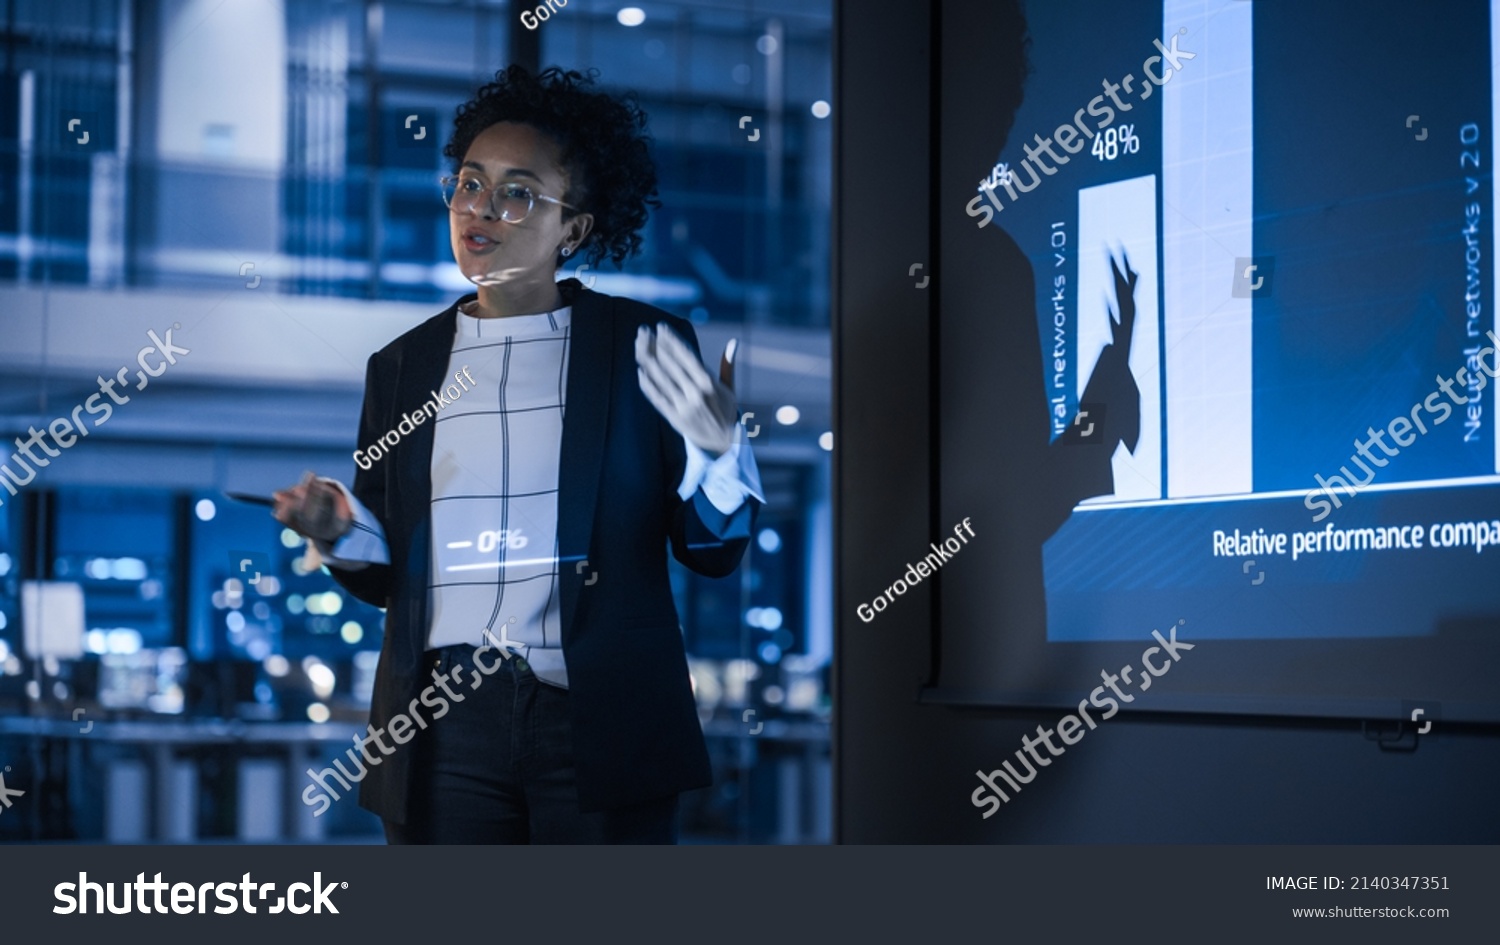 e-Business Technology Conference Presentation: Innovative Black Tech Engineer Talks about Revolutionary High-Tech Product. Projector Screen Shows Graphs, Infographics, AI, Big Data, Machine Learning #2140347351